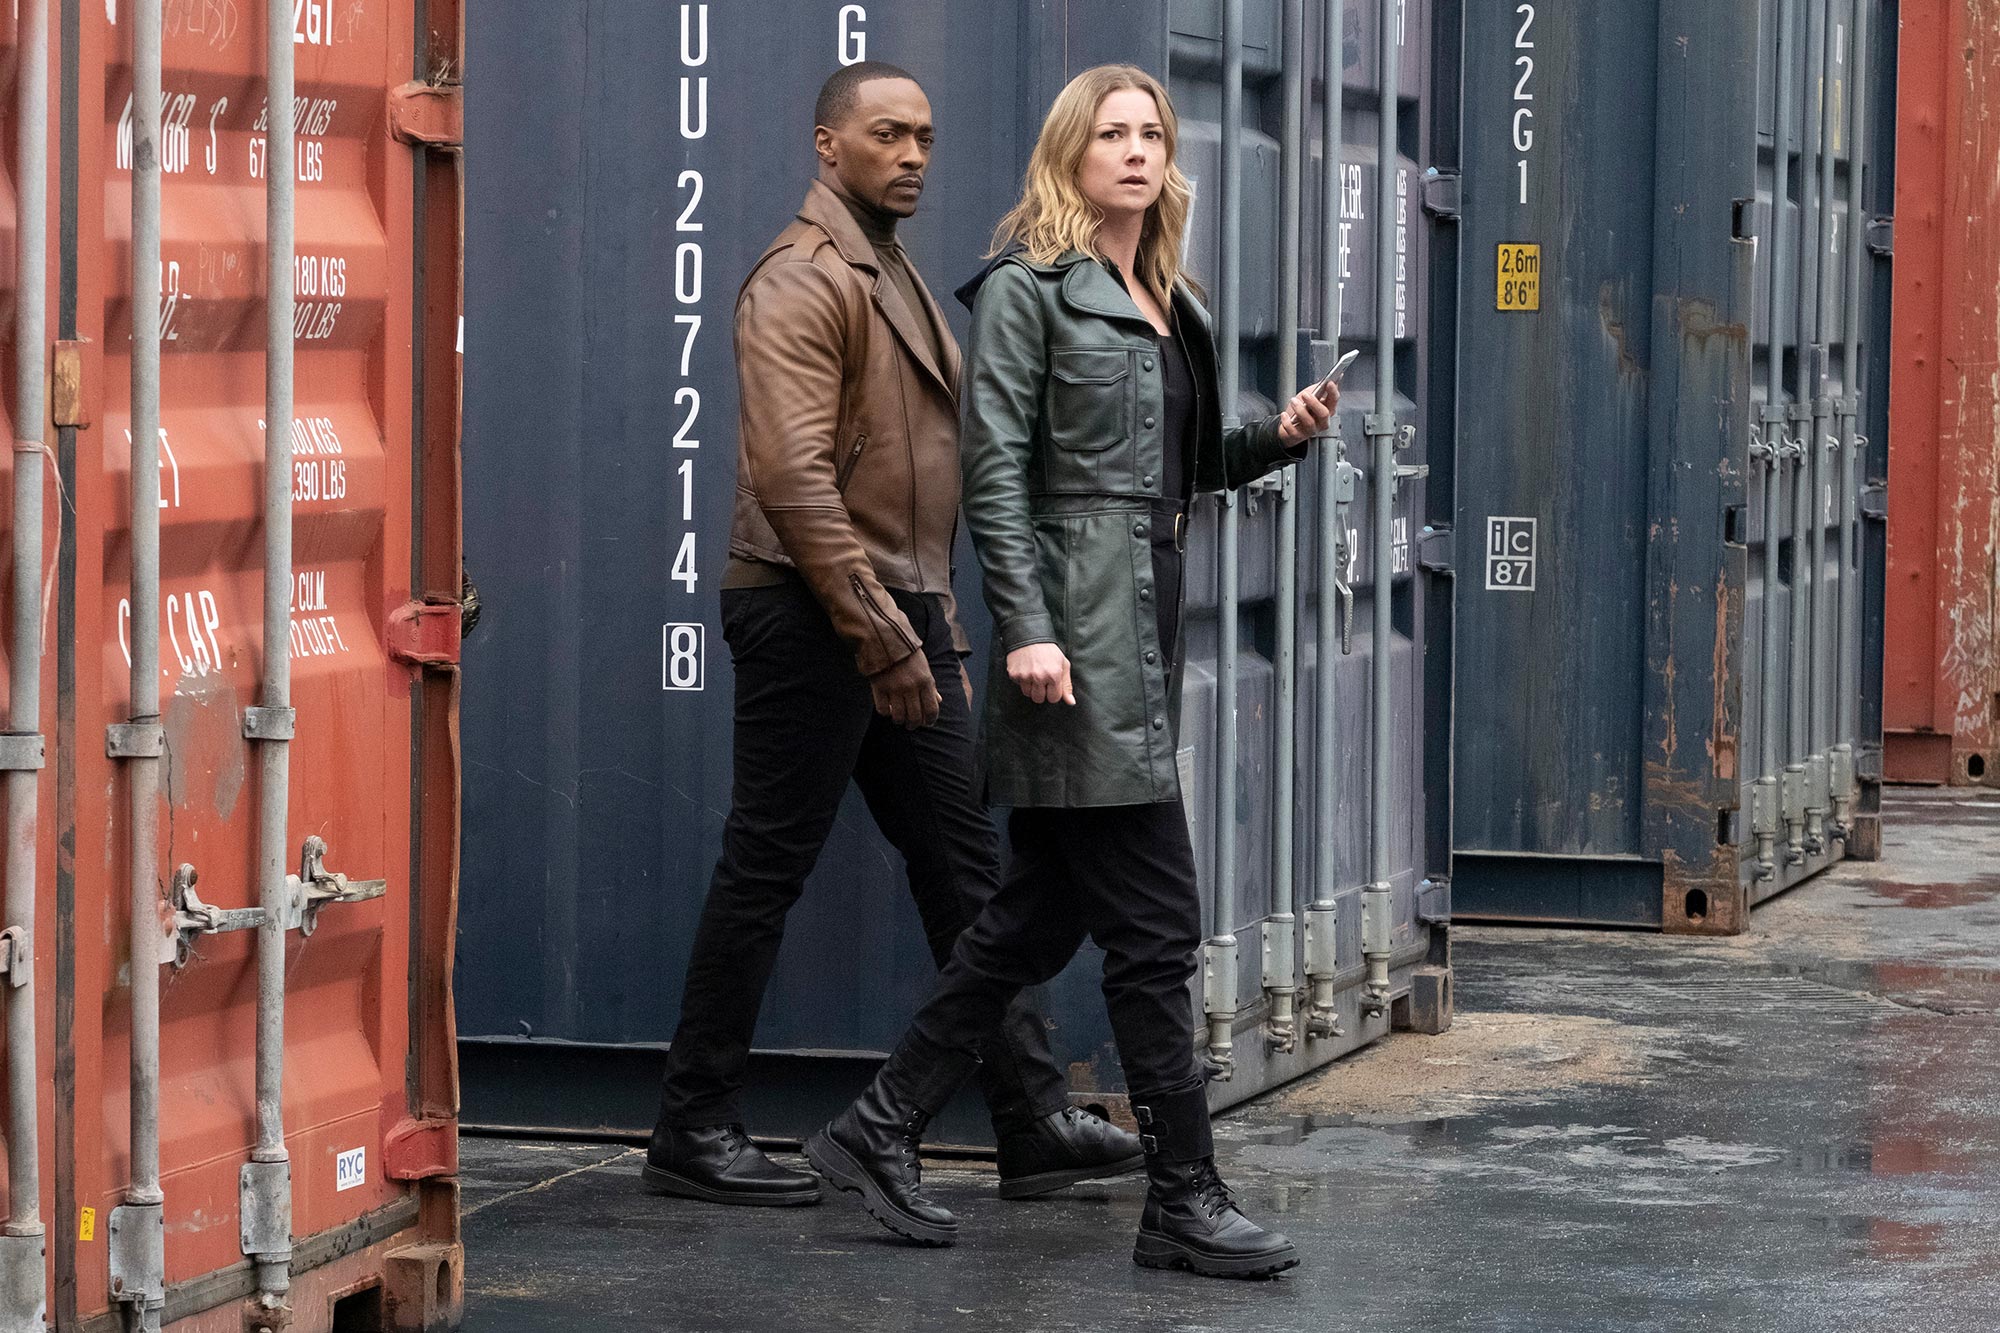 Emily VanCamp teases the mystery of Sharon Carter on The Falcon and the Winter Soldier